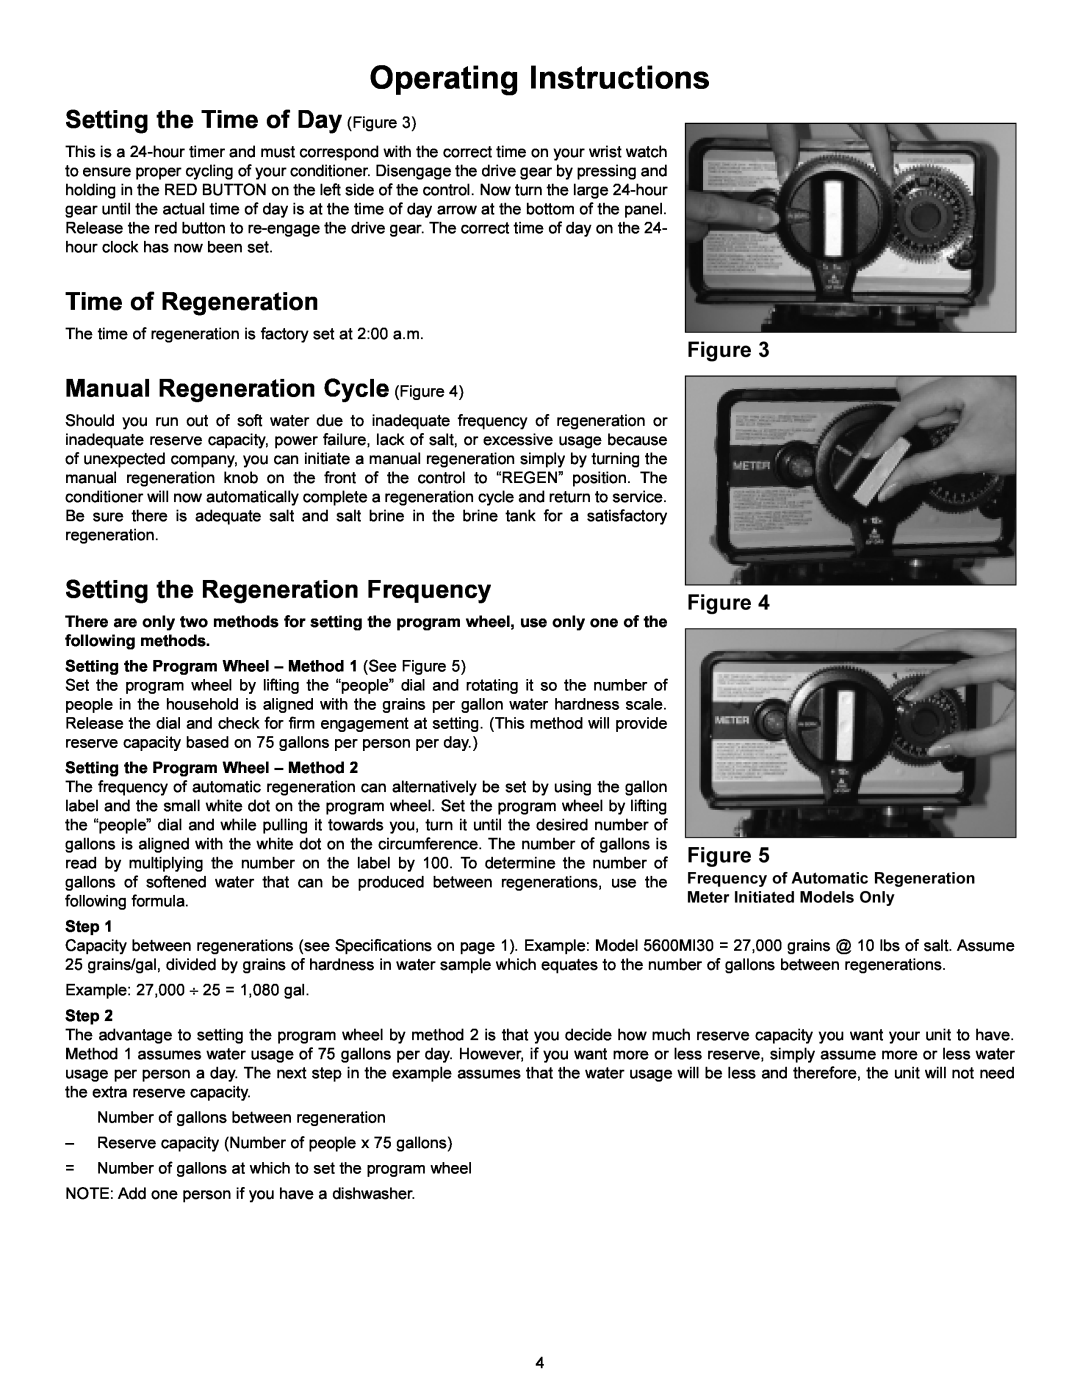 HydroSurge 5600 operation manual Operating Instructions, Setting the Time of Day Figure, Time of Regeneration 